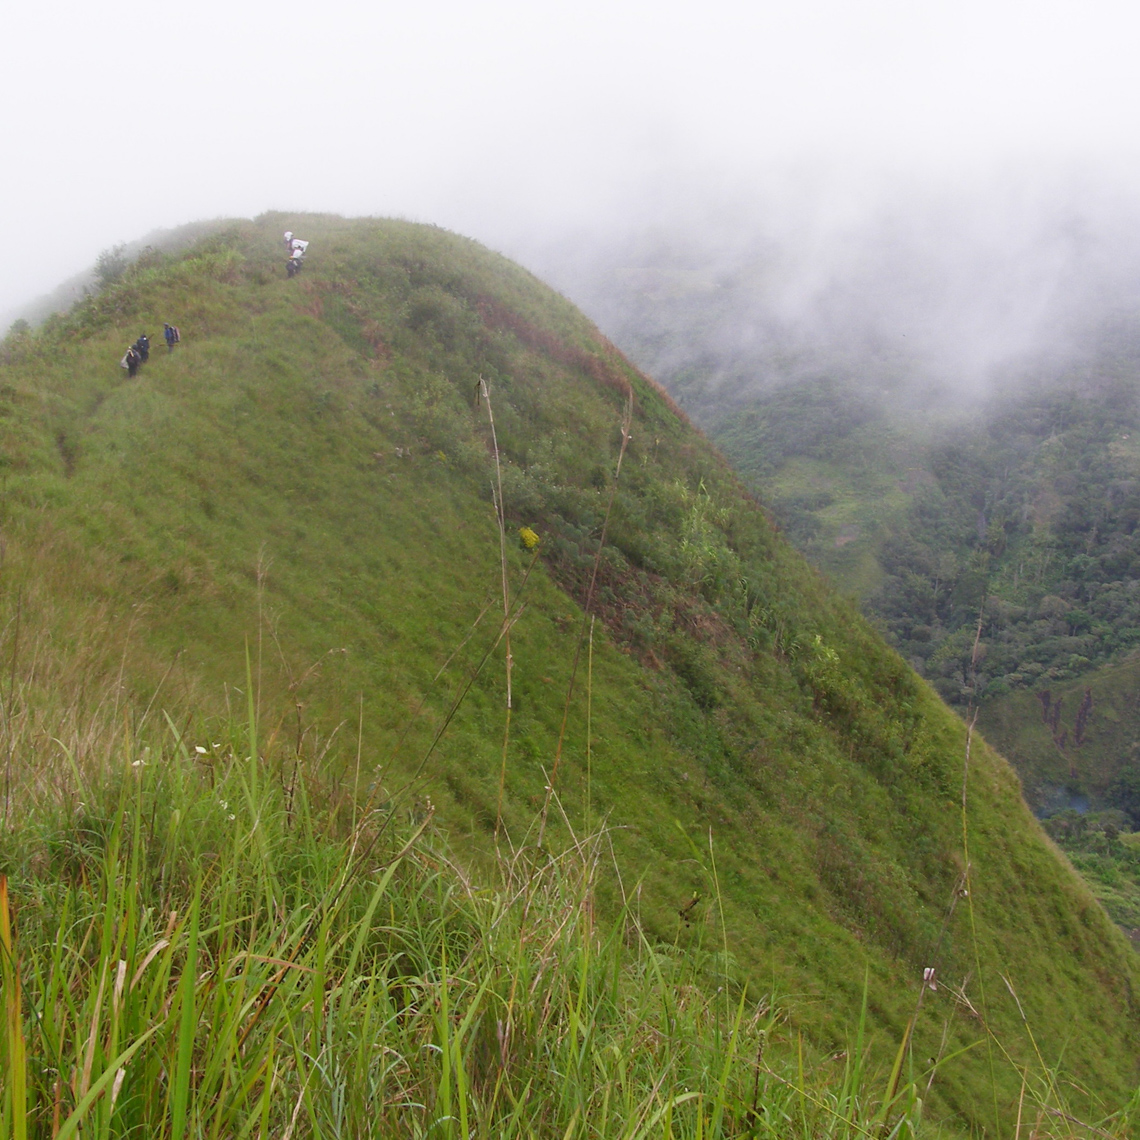 Steep Slopes of Finisterre Mountains, Field Collecting New Guinea Art.